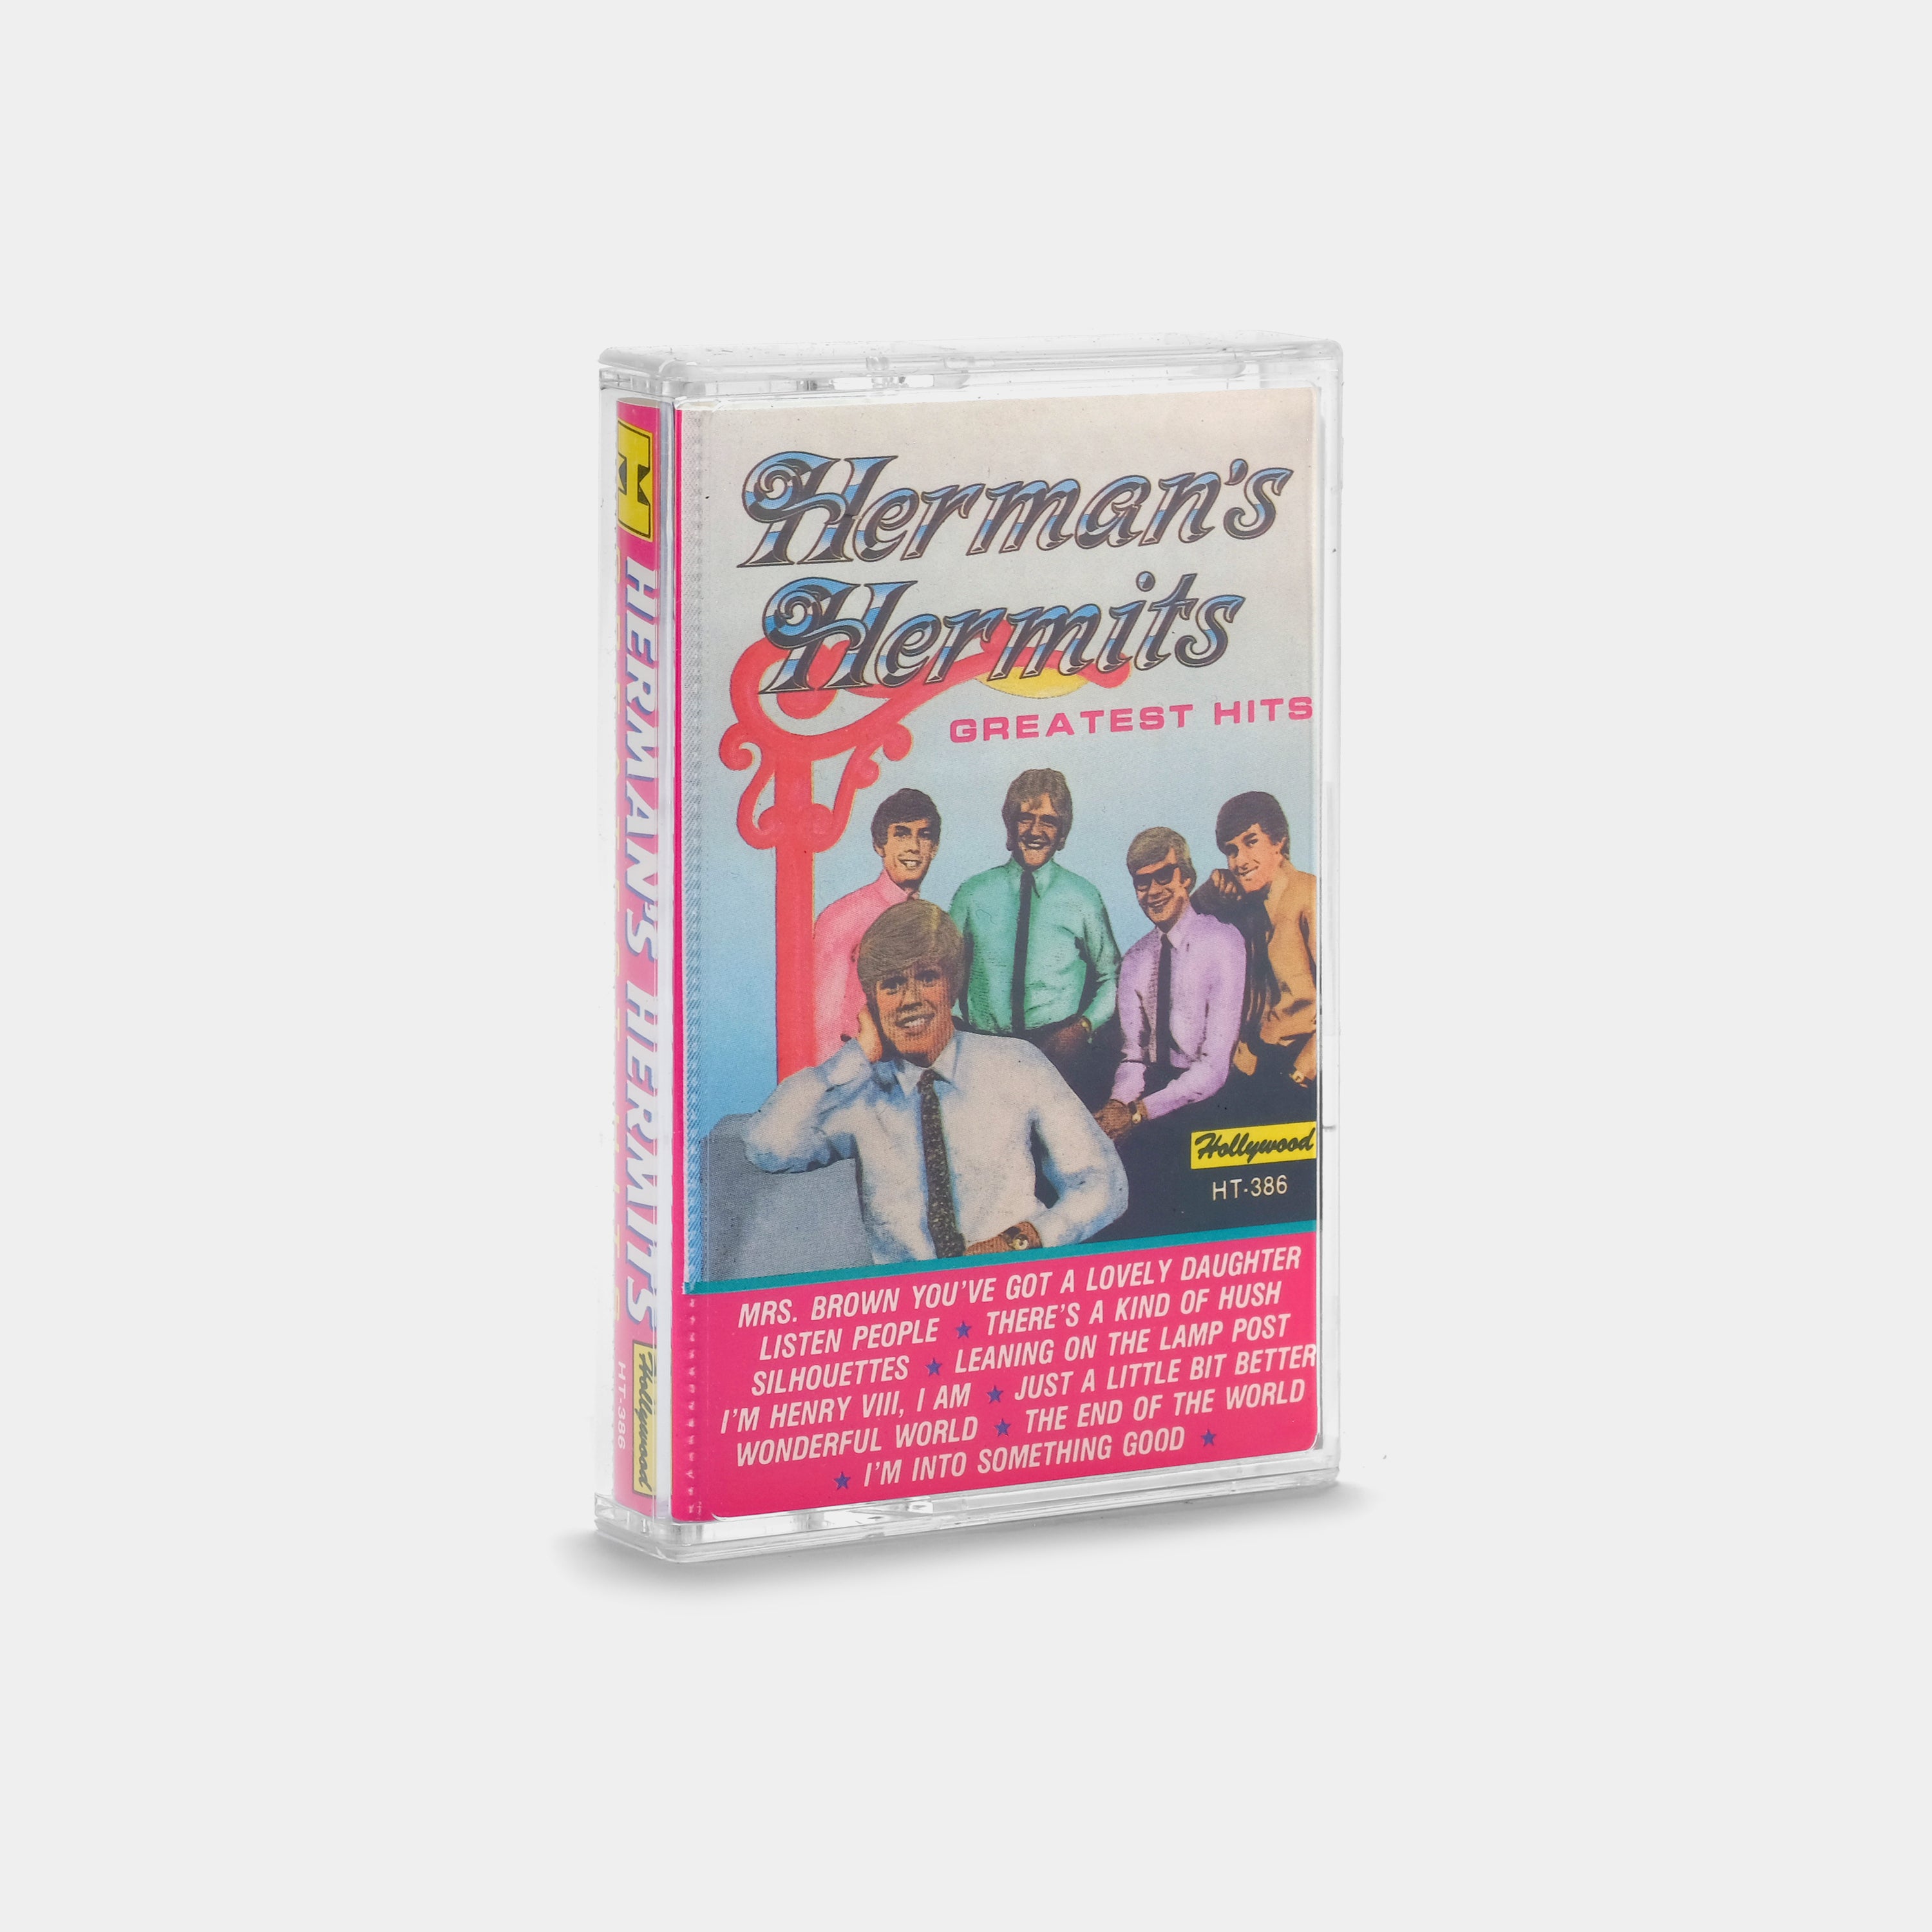 Herman's Hermits - Greatest Hits Cassette Tape